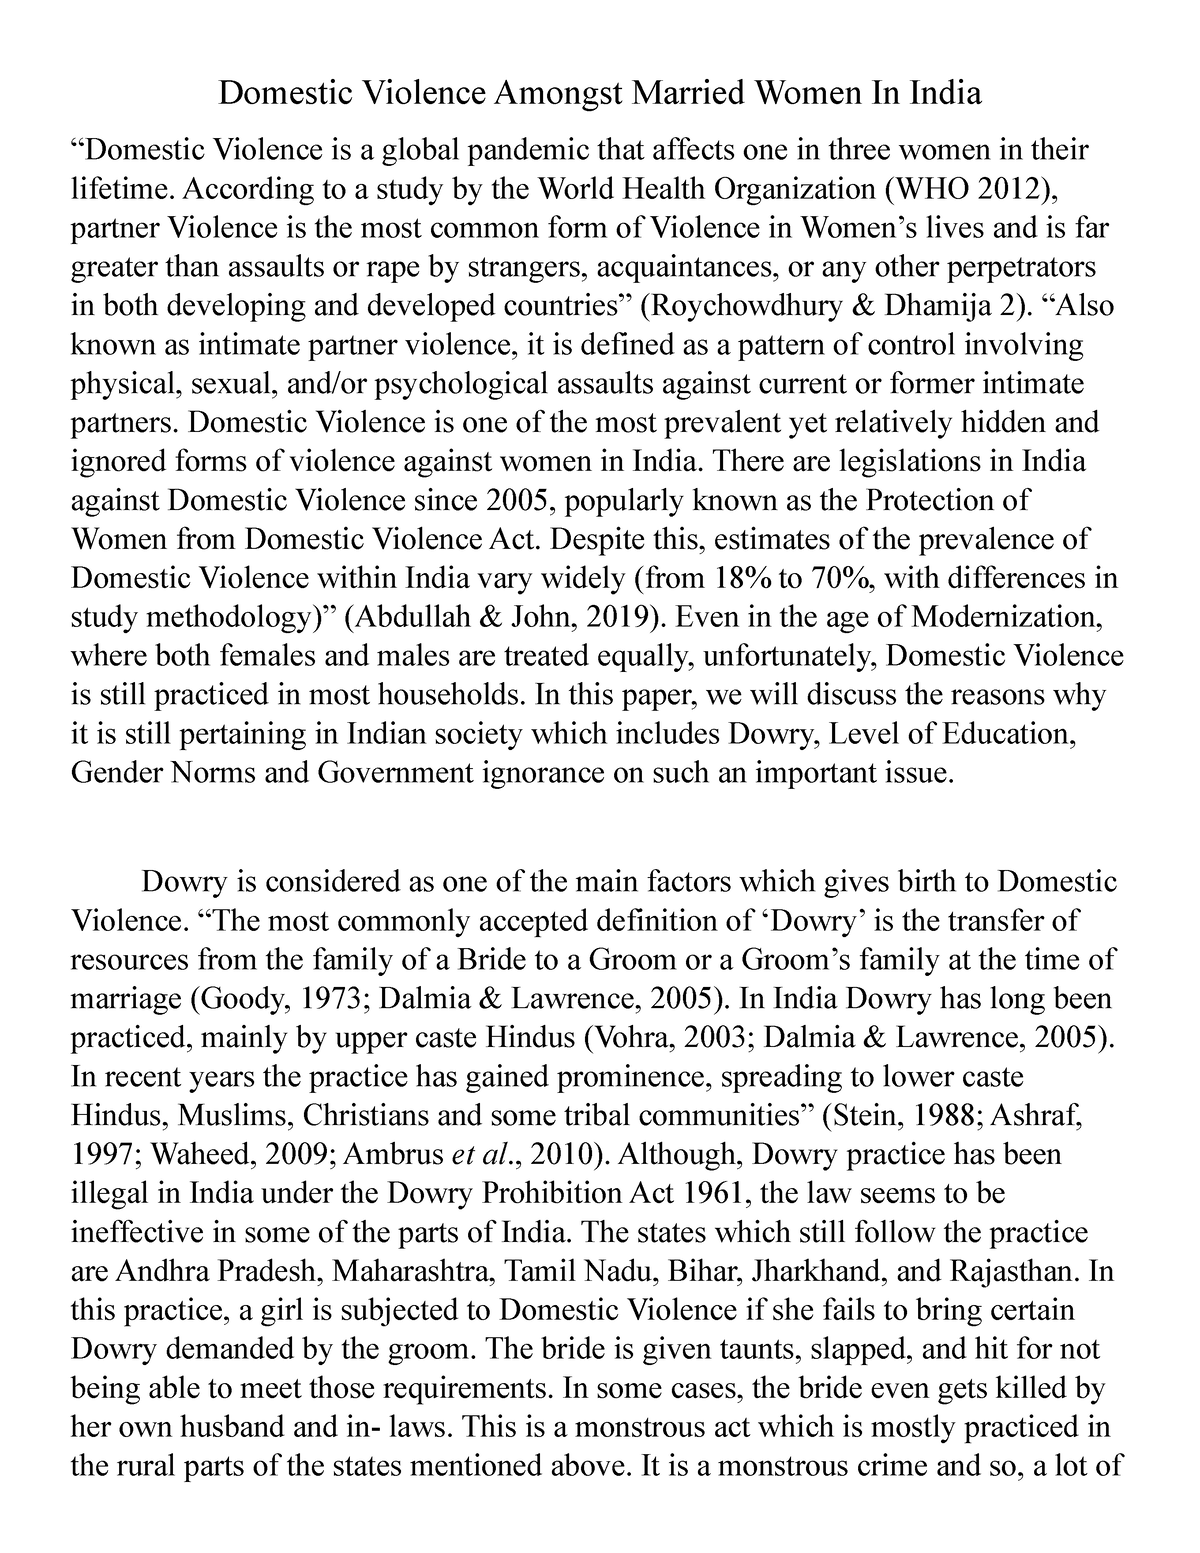 custodial violence in india research paper